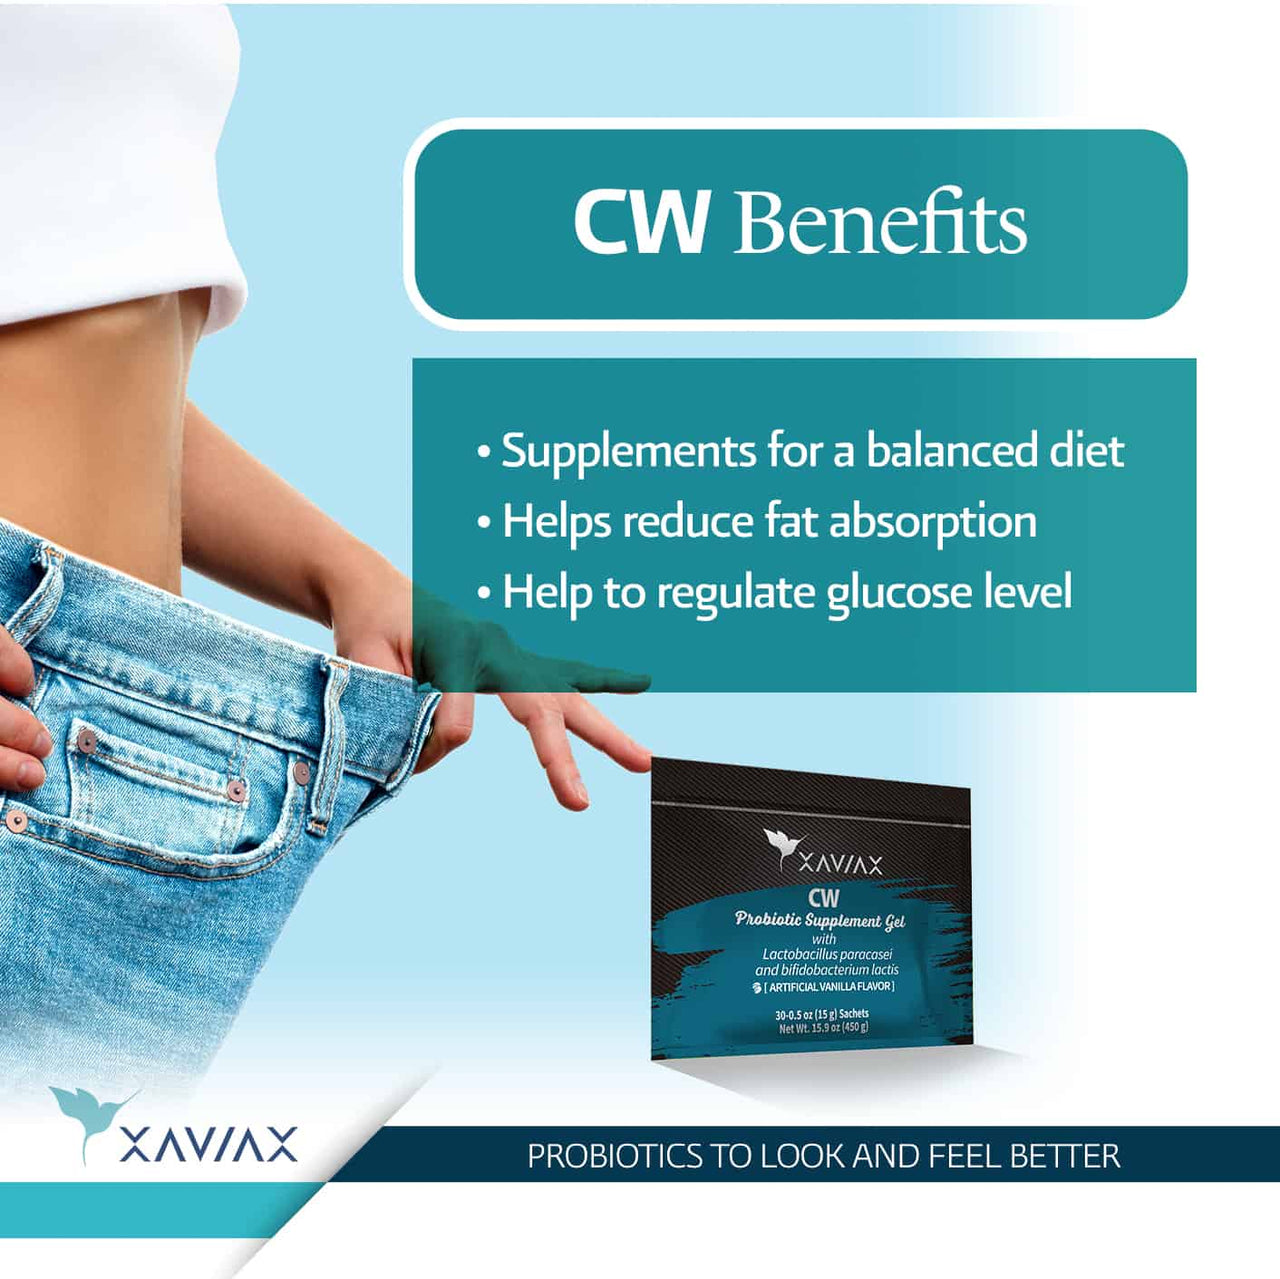 cw benefits help to regulate glucose level